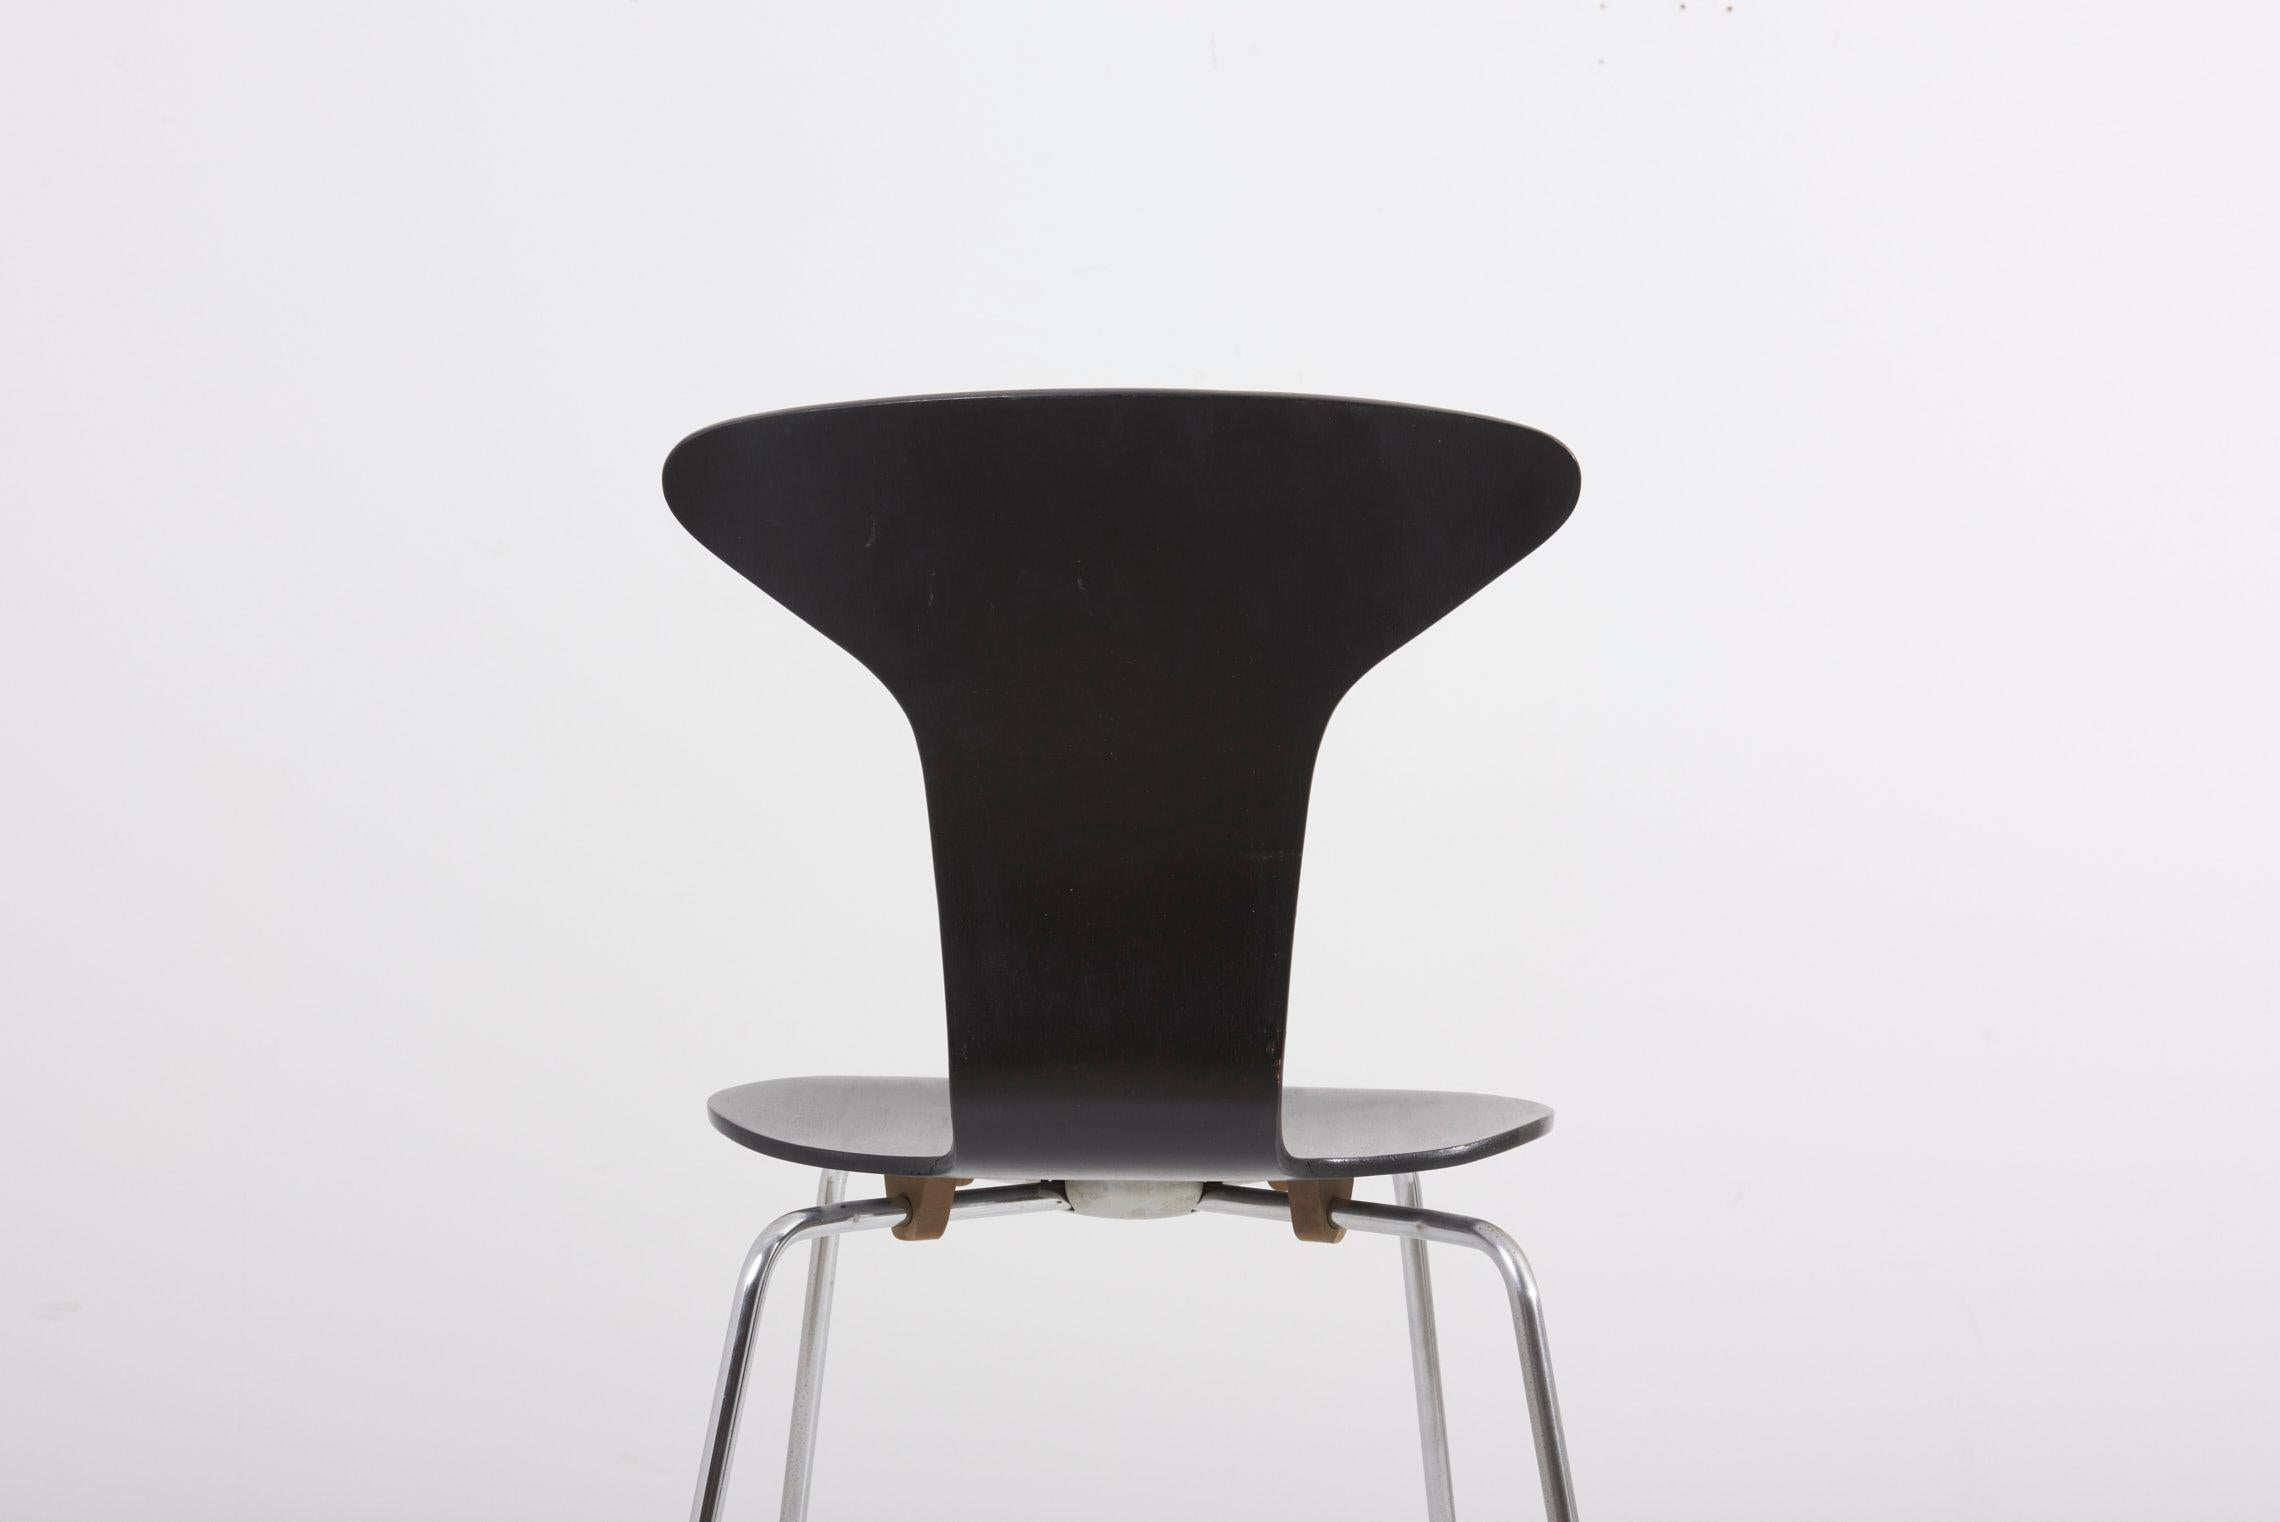 Set of 3 Mosquito Munkegård Dining Chairs by Arne Jacobsen, Denmark, 1950s For Sale 2